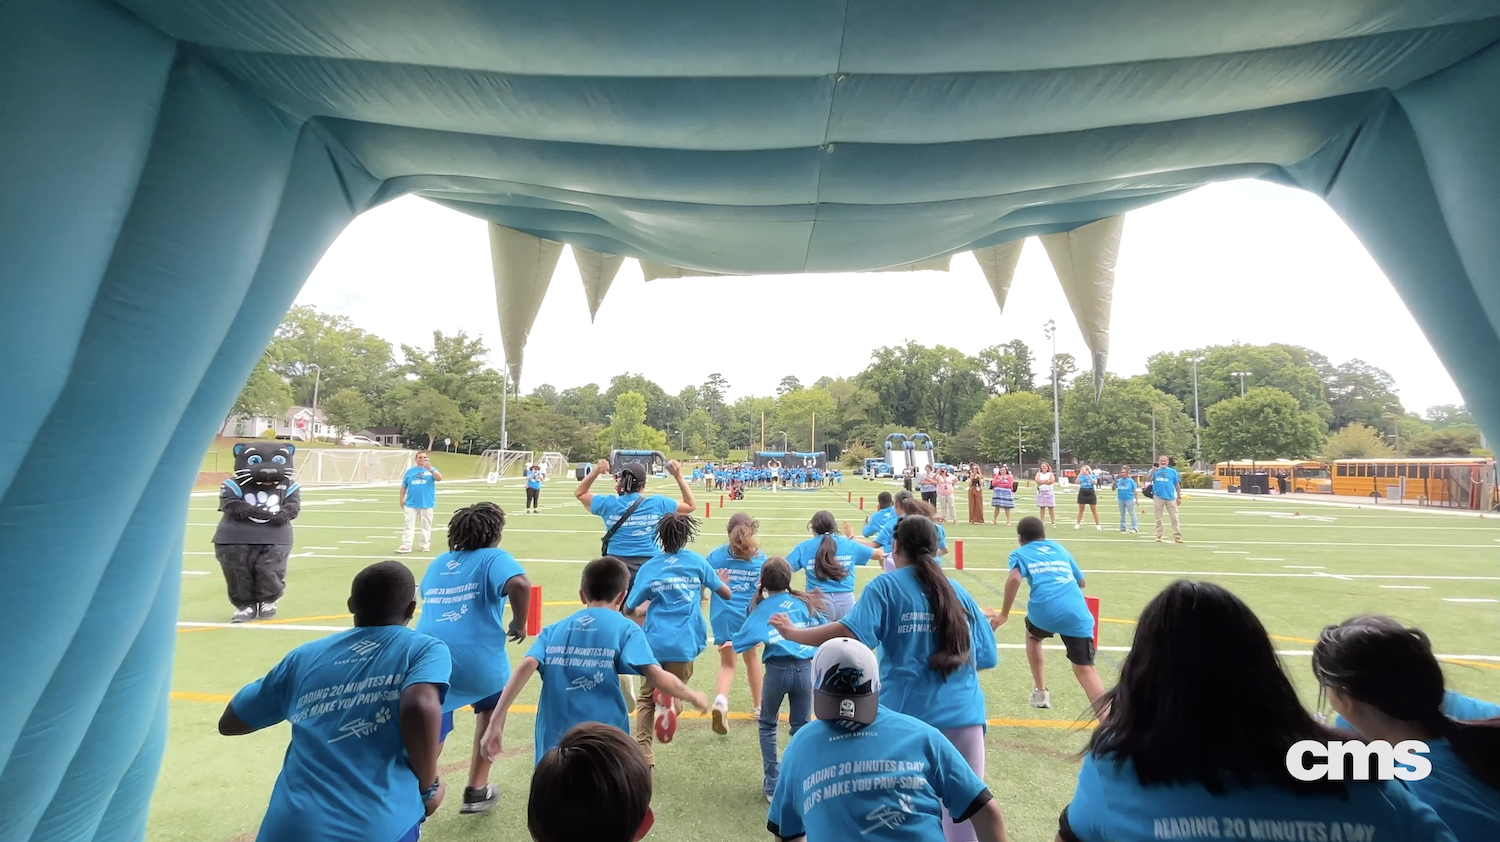  Sir Purr's Pawsome Readers' top performing elementary schools celebrate with a Panthers field day!